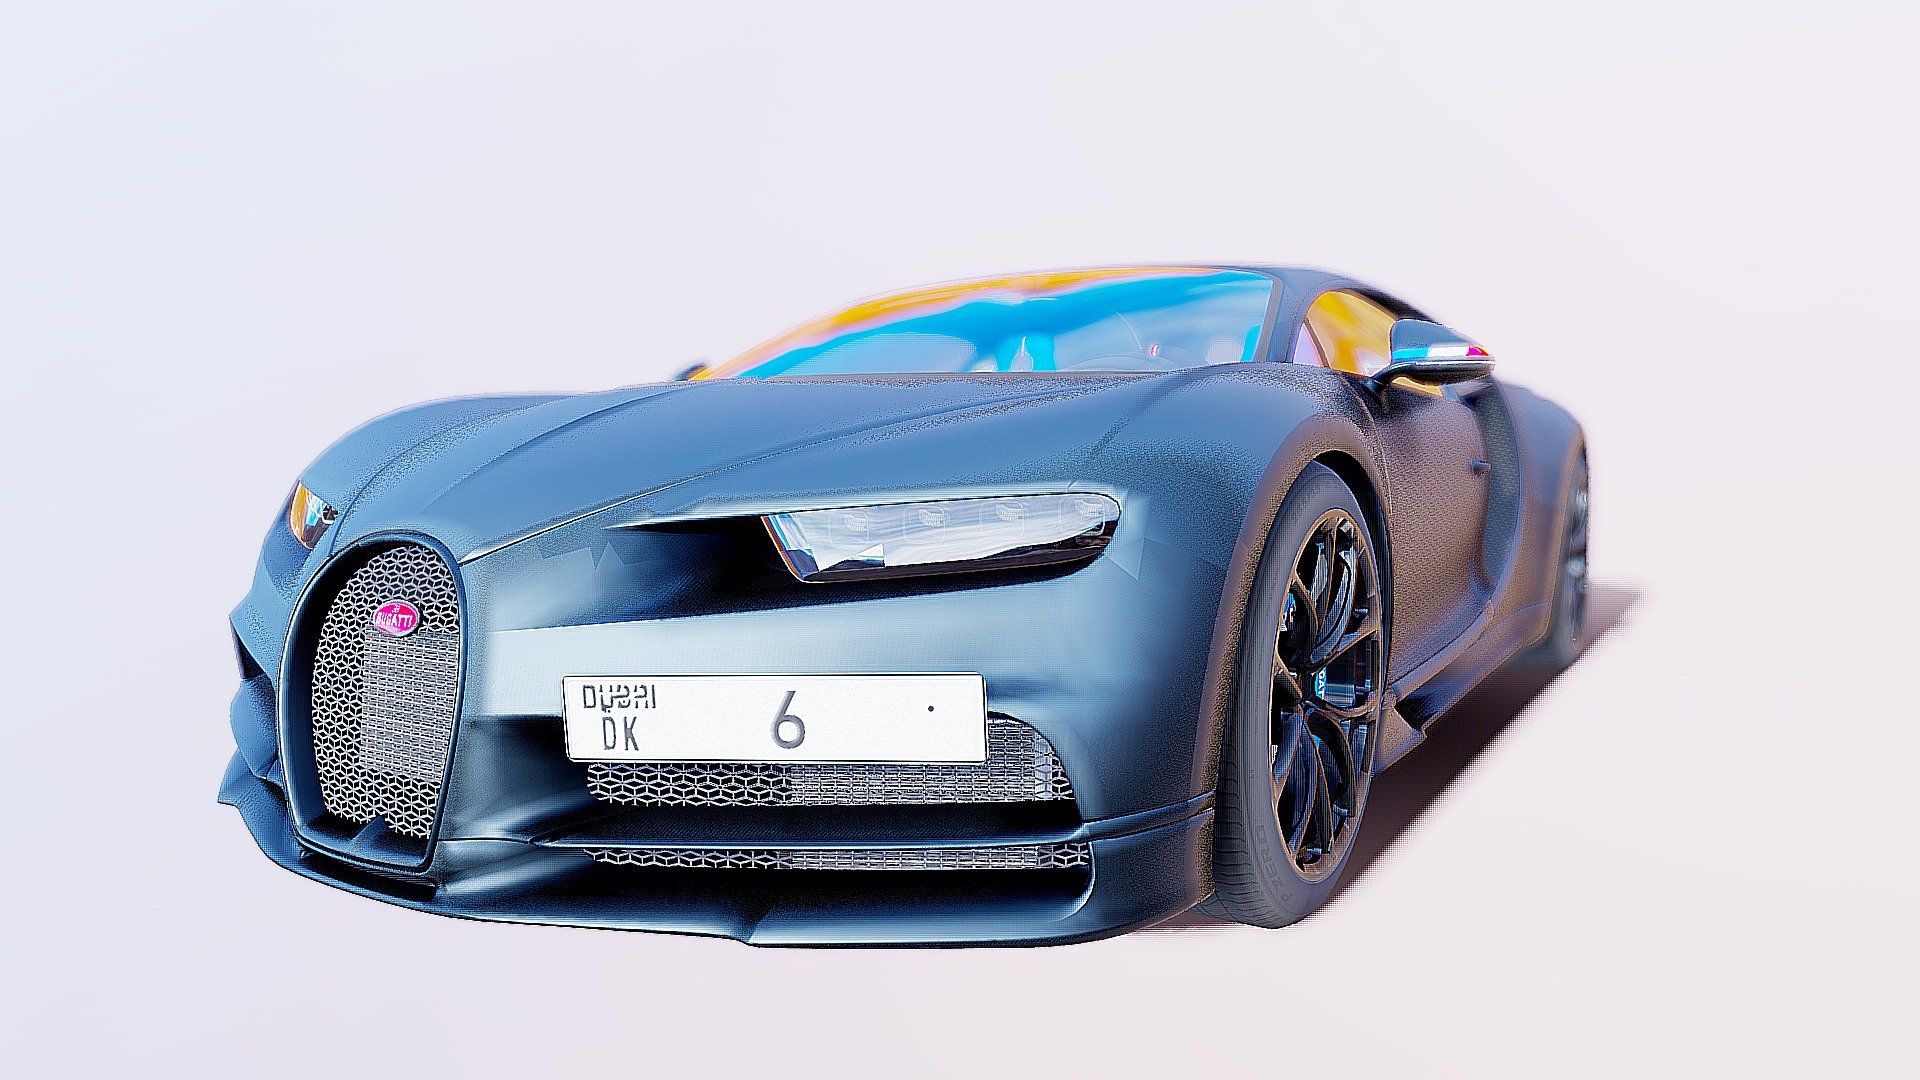 The Chiron is one of the fastest cars on the planet, and the French brand recently launched the &ldquo;110 Years Bugatti